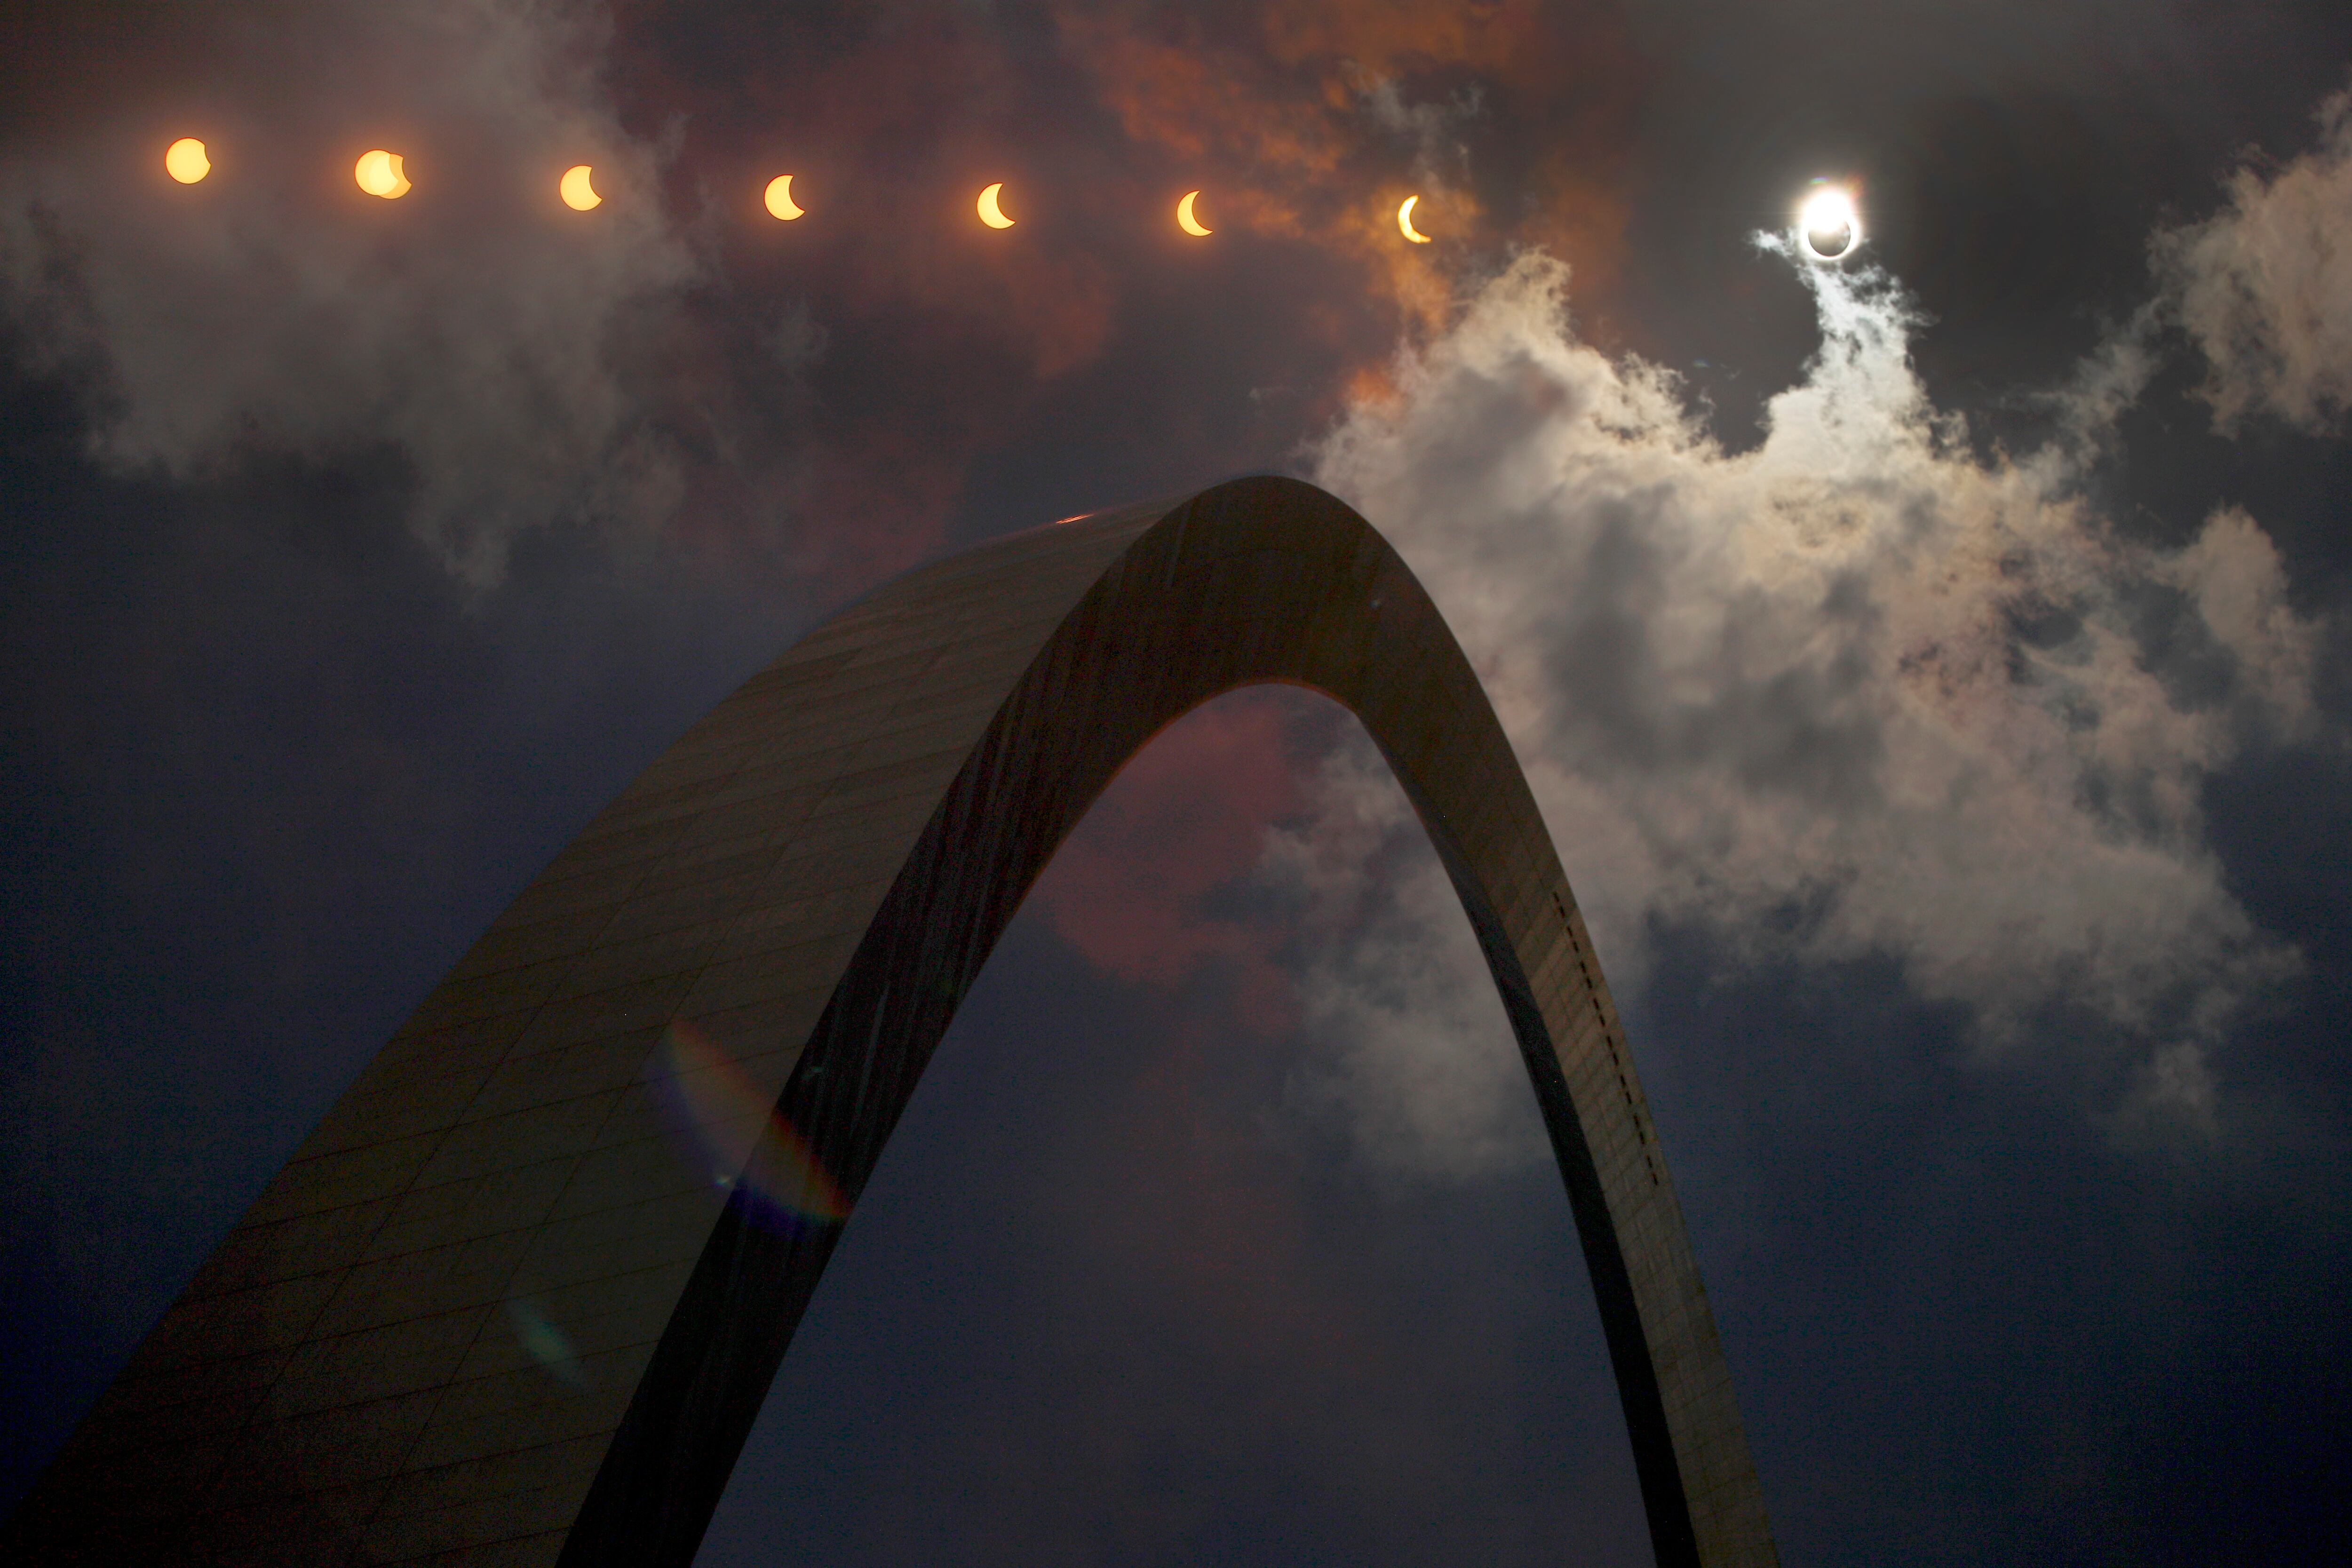 A multiple exposure photograph shows the progression of a solar eclipse over St. Louis on August, 2017.